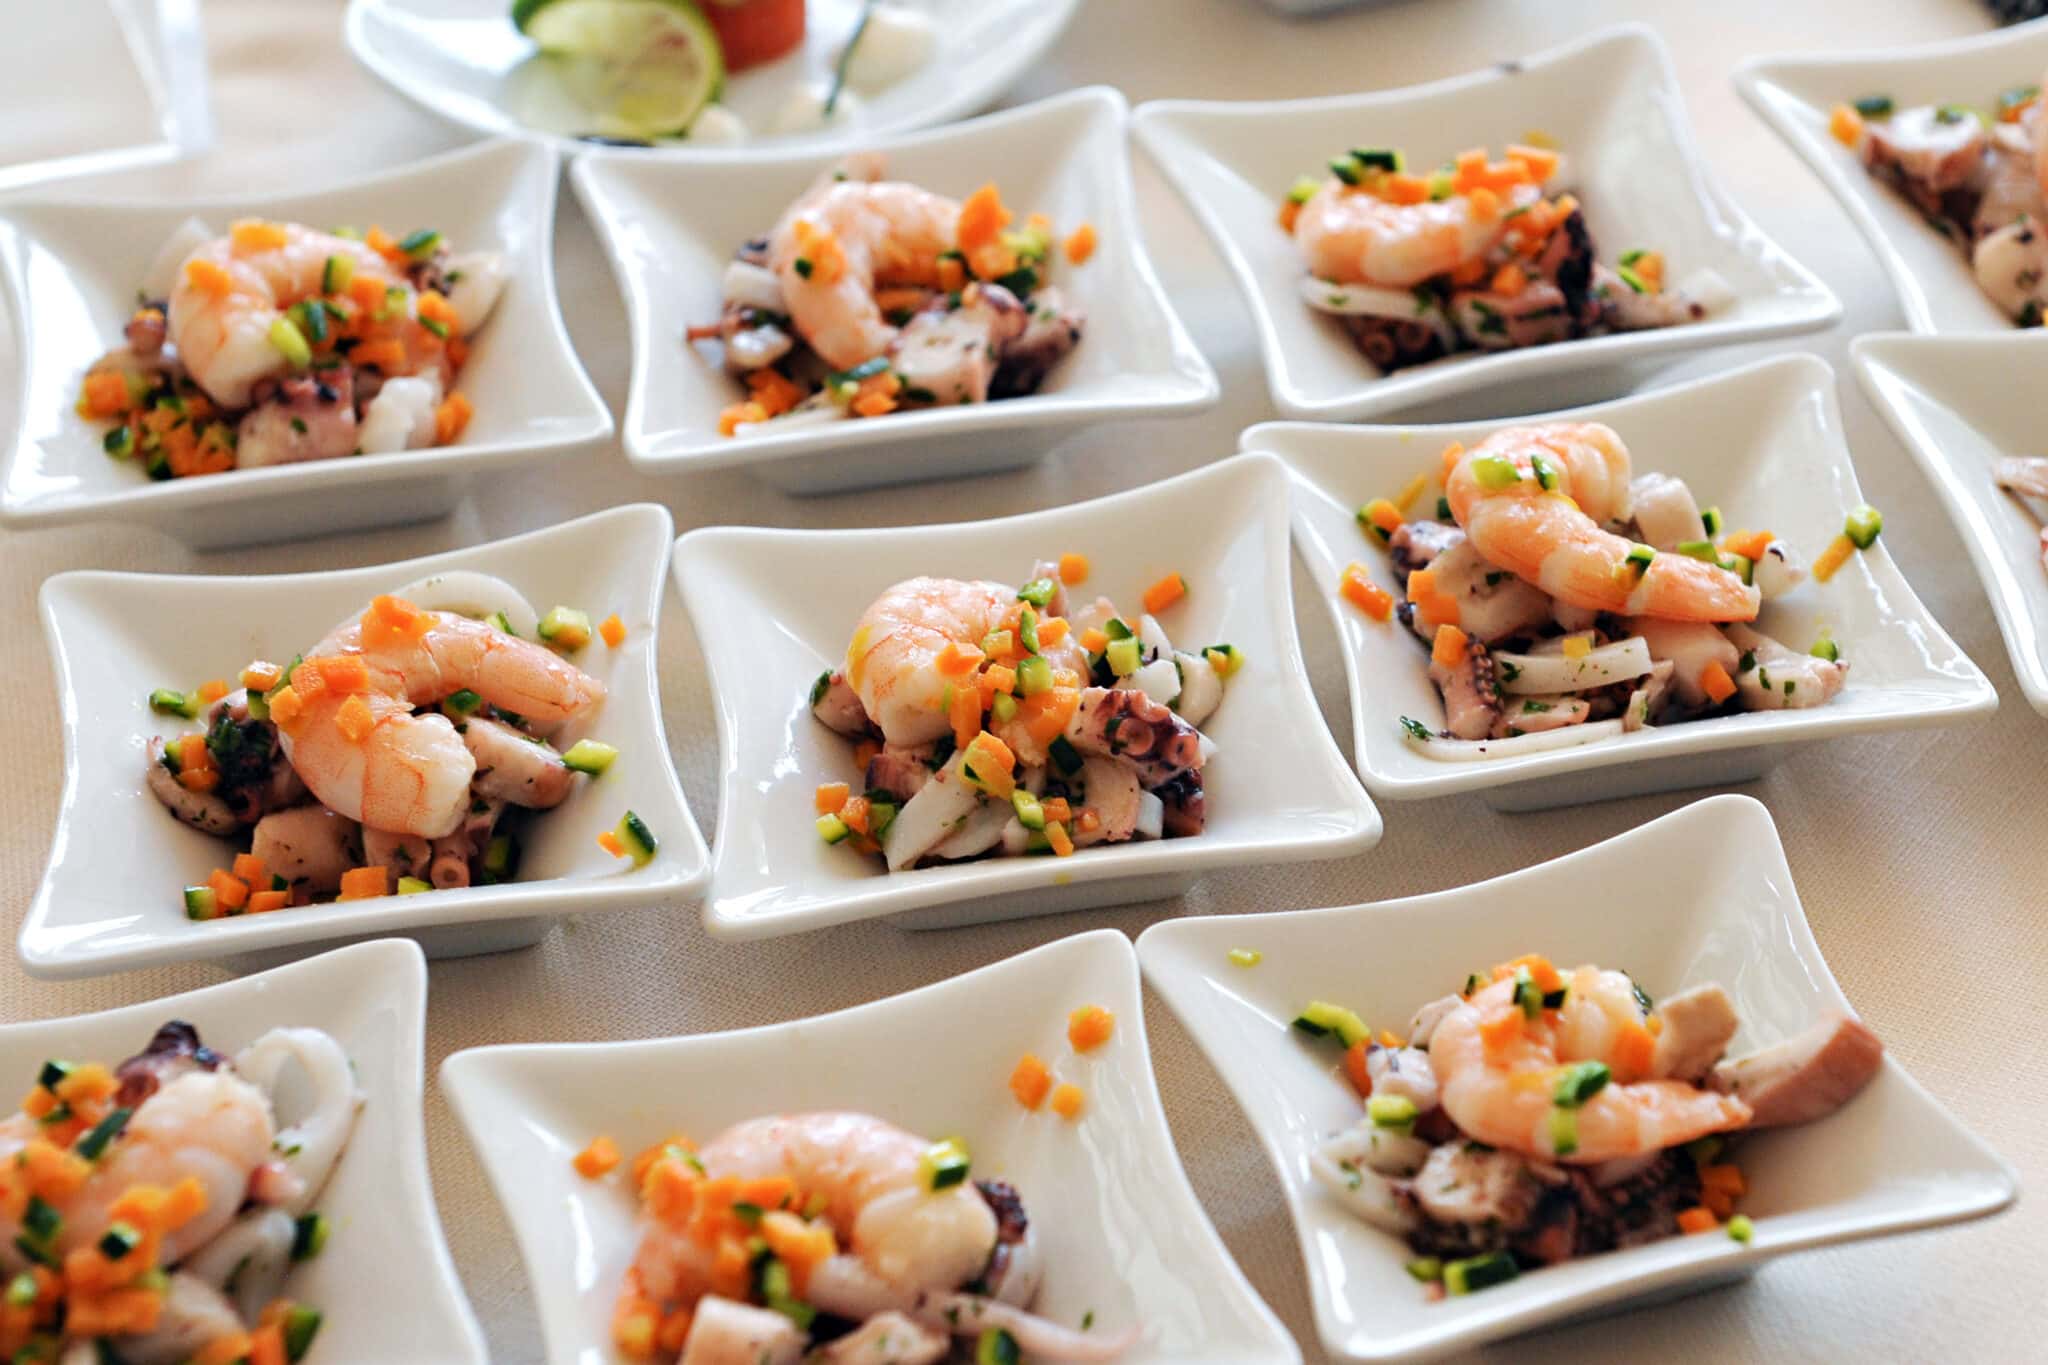 Frozen Fish and Seafood for Catering Companies